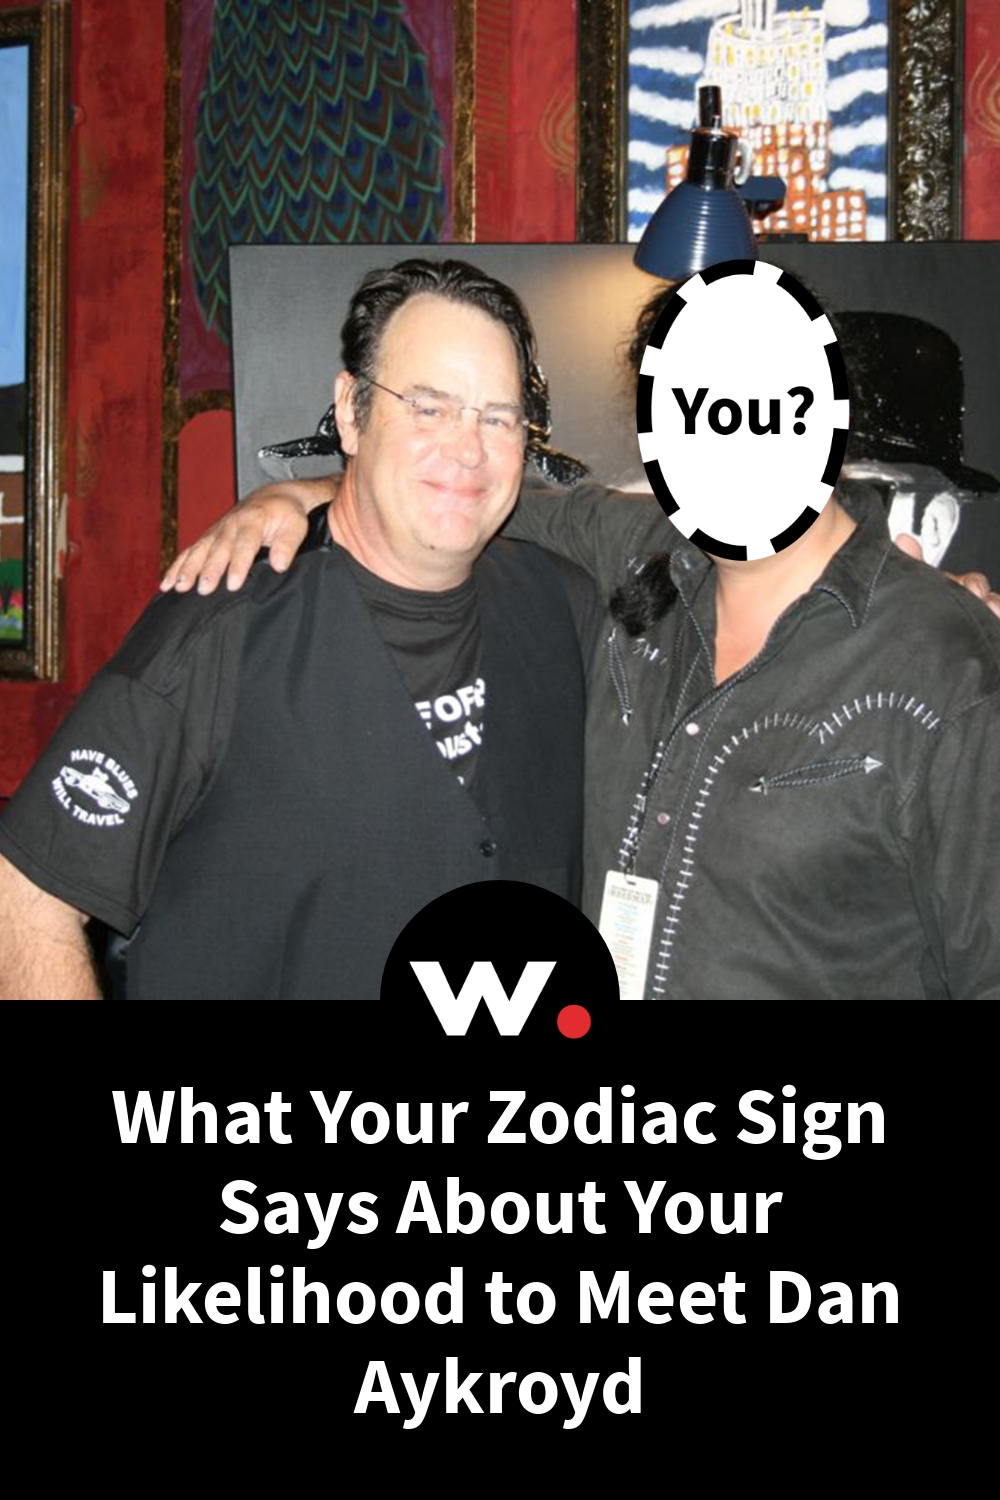 What Your Zodiac Sign Says About Your Likelihood to Meet Dan Aykroyd